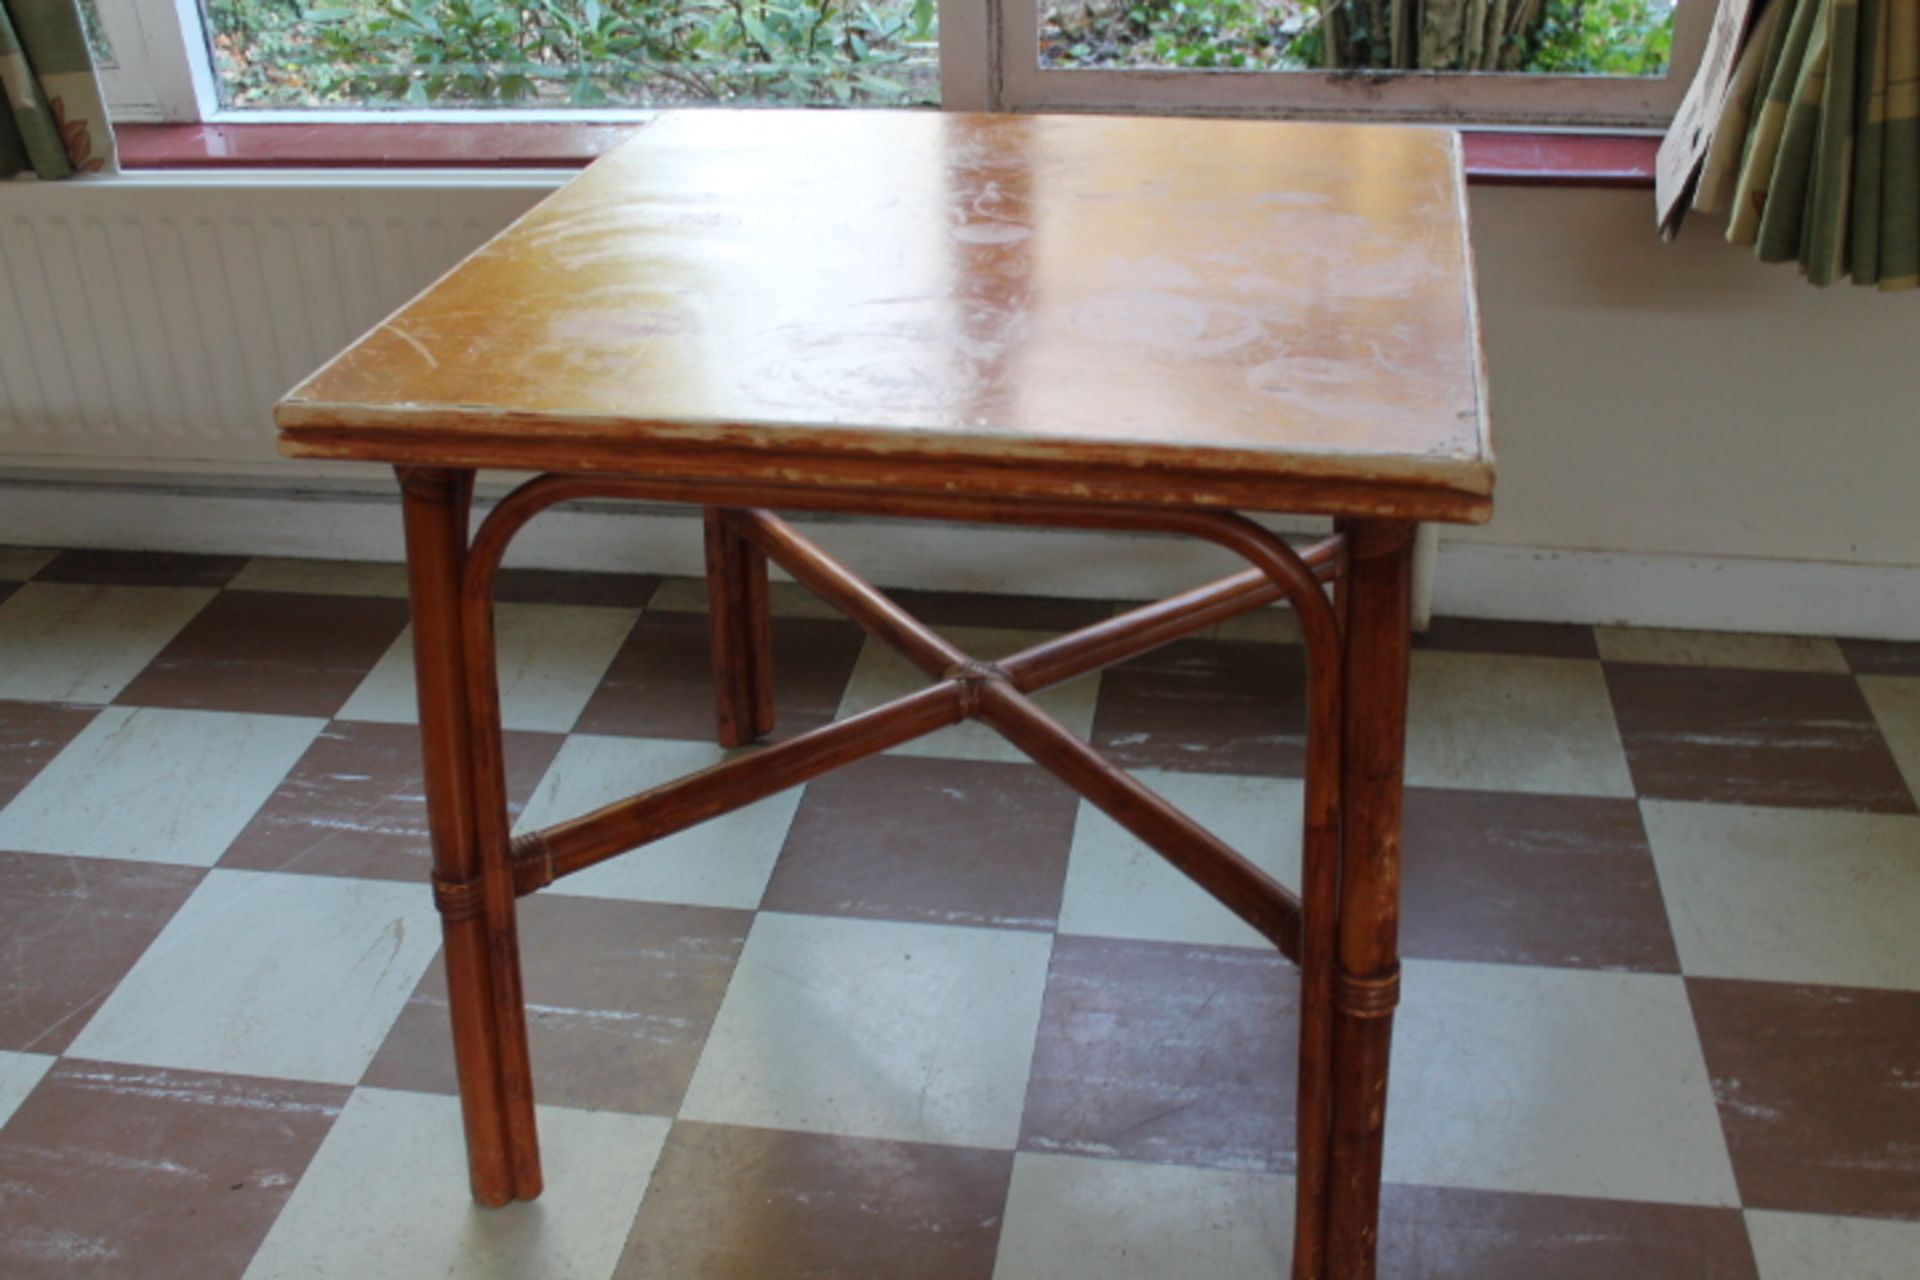 Four Cane Ribbed Edged Conservatory Tables (scuffed)